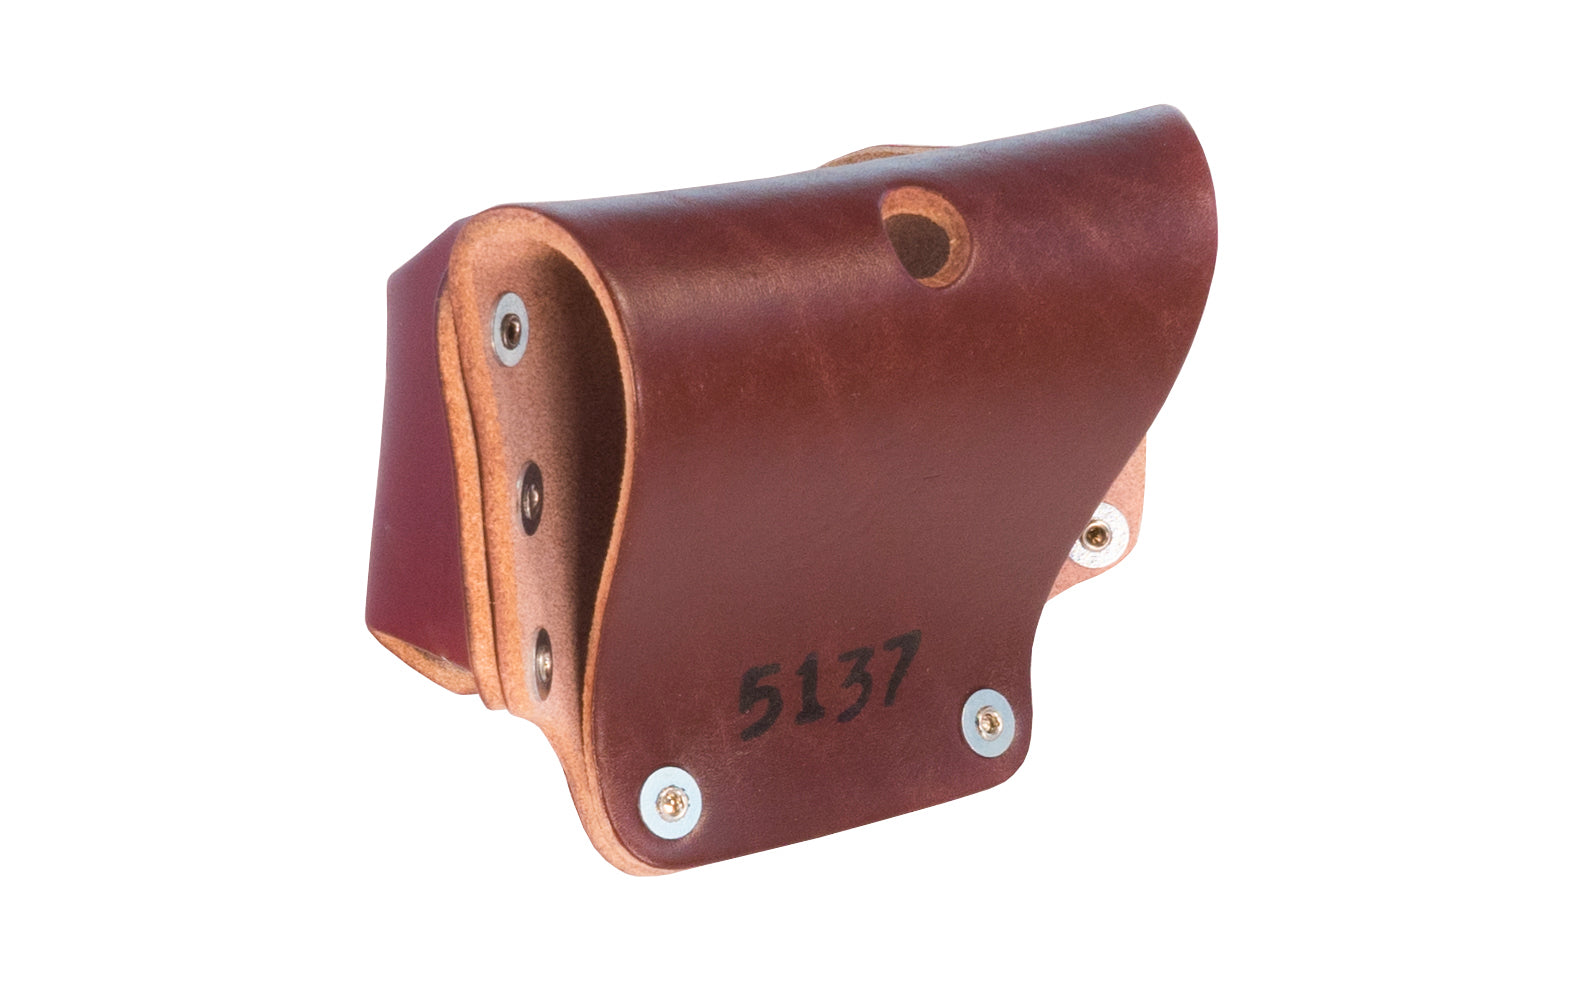 Made in USA - Occidental Leather high mount Large Tape Holder Holster ~ Model No 5137 ~ Quality leather high mount tape pocket holds up to a 35’ tape or the "FatMax". Accepts up to 3" work belt - Fits up to a 3" work belt - High Quality - Large Tape Holder - Riveted - Tape Holster - Hand Made - 759244222203 - Leather 